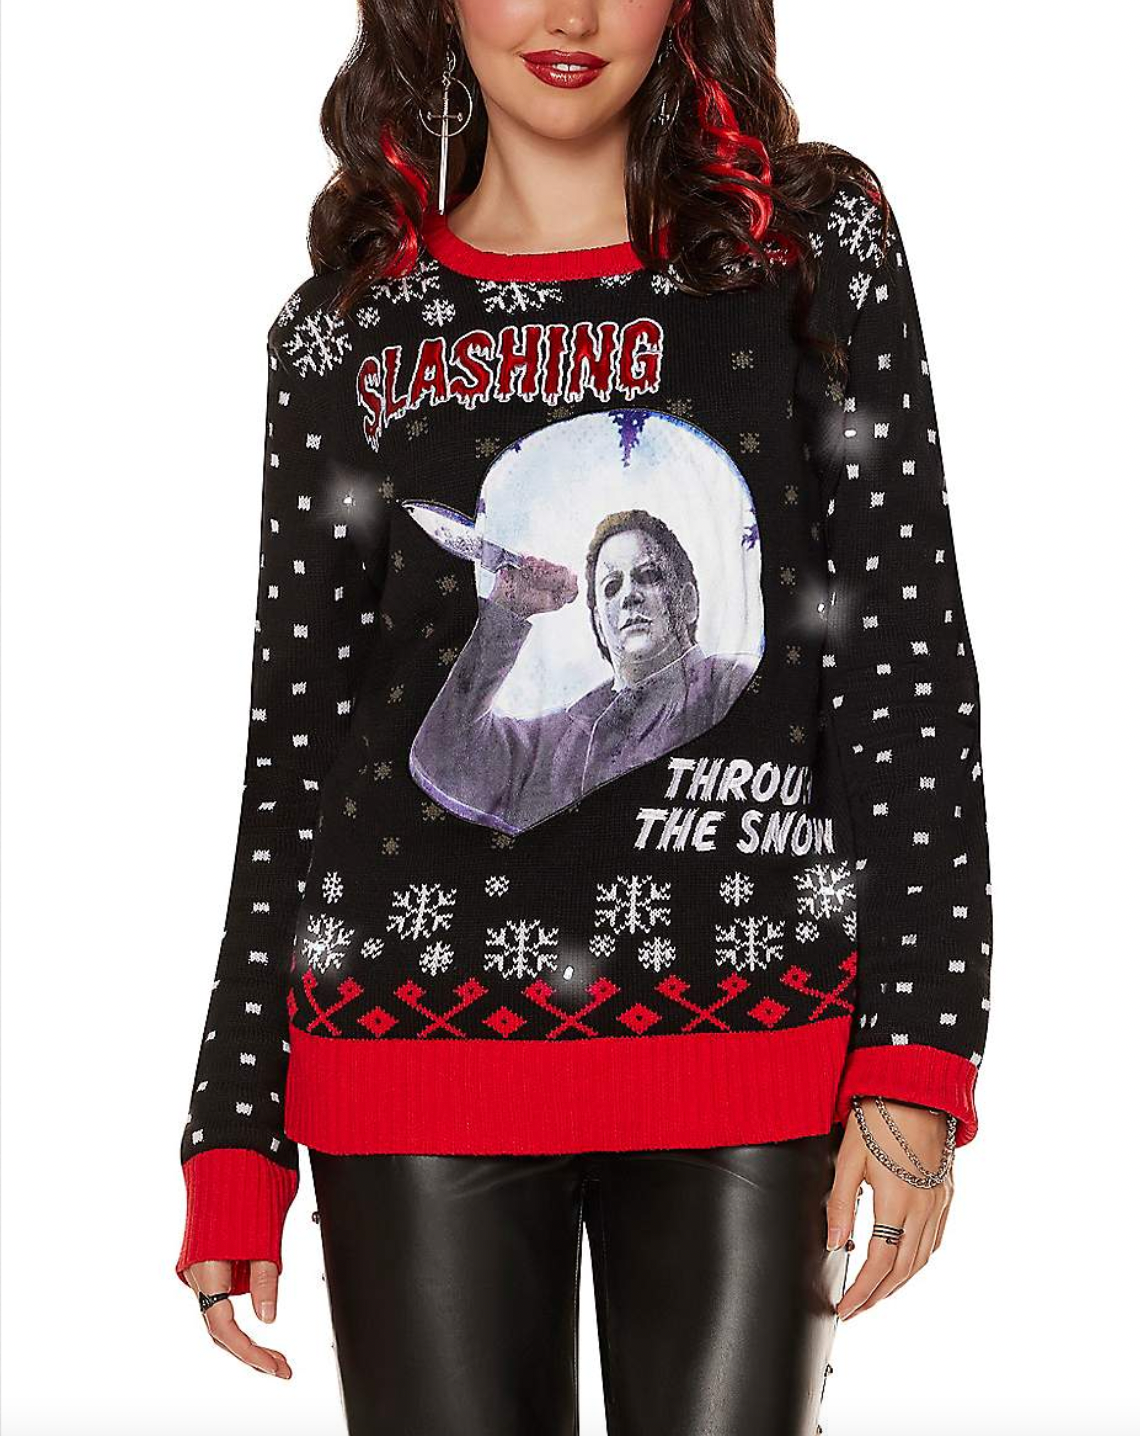 spencers-halloween-michael-myers-sweater.png